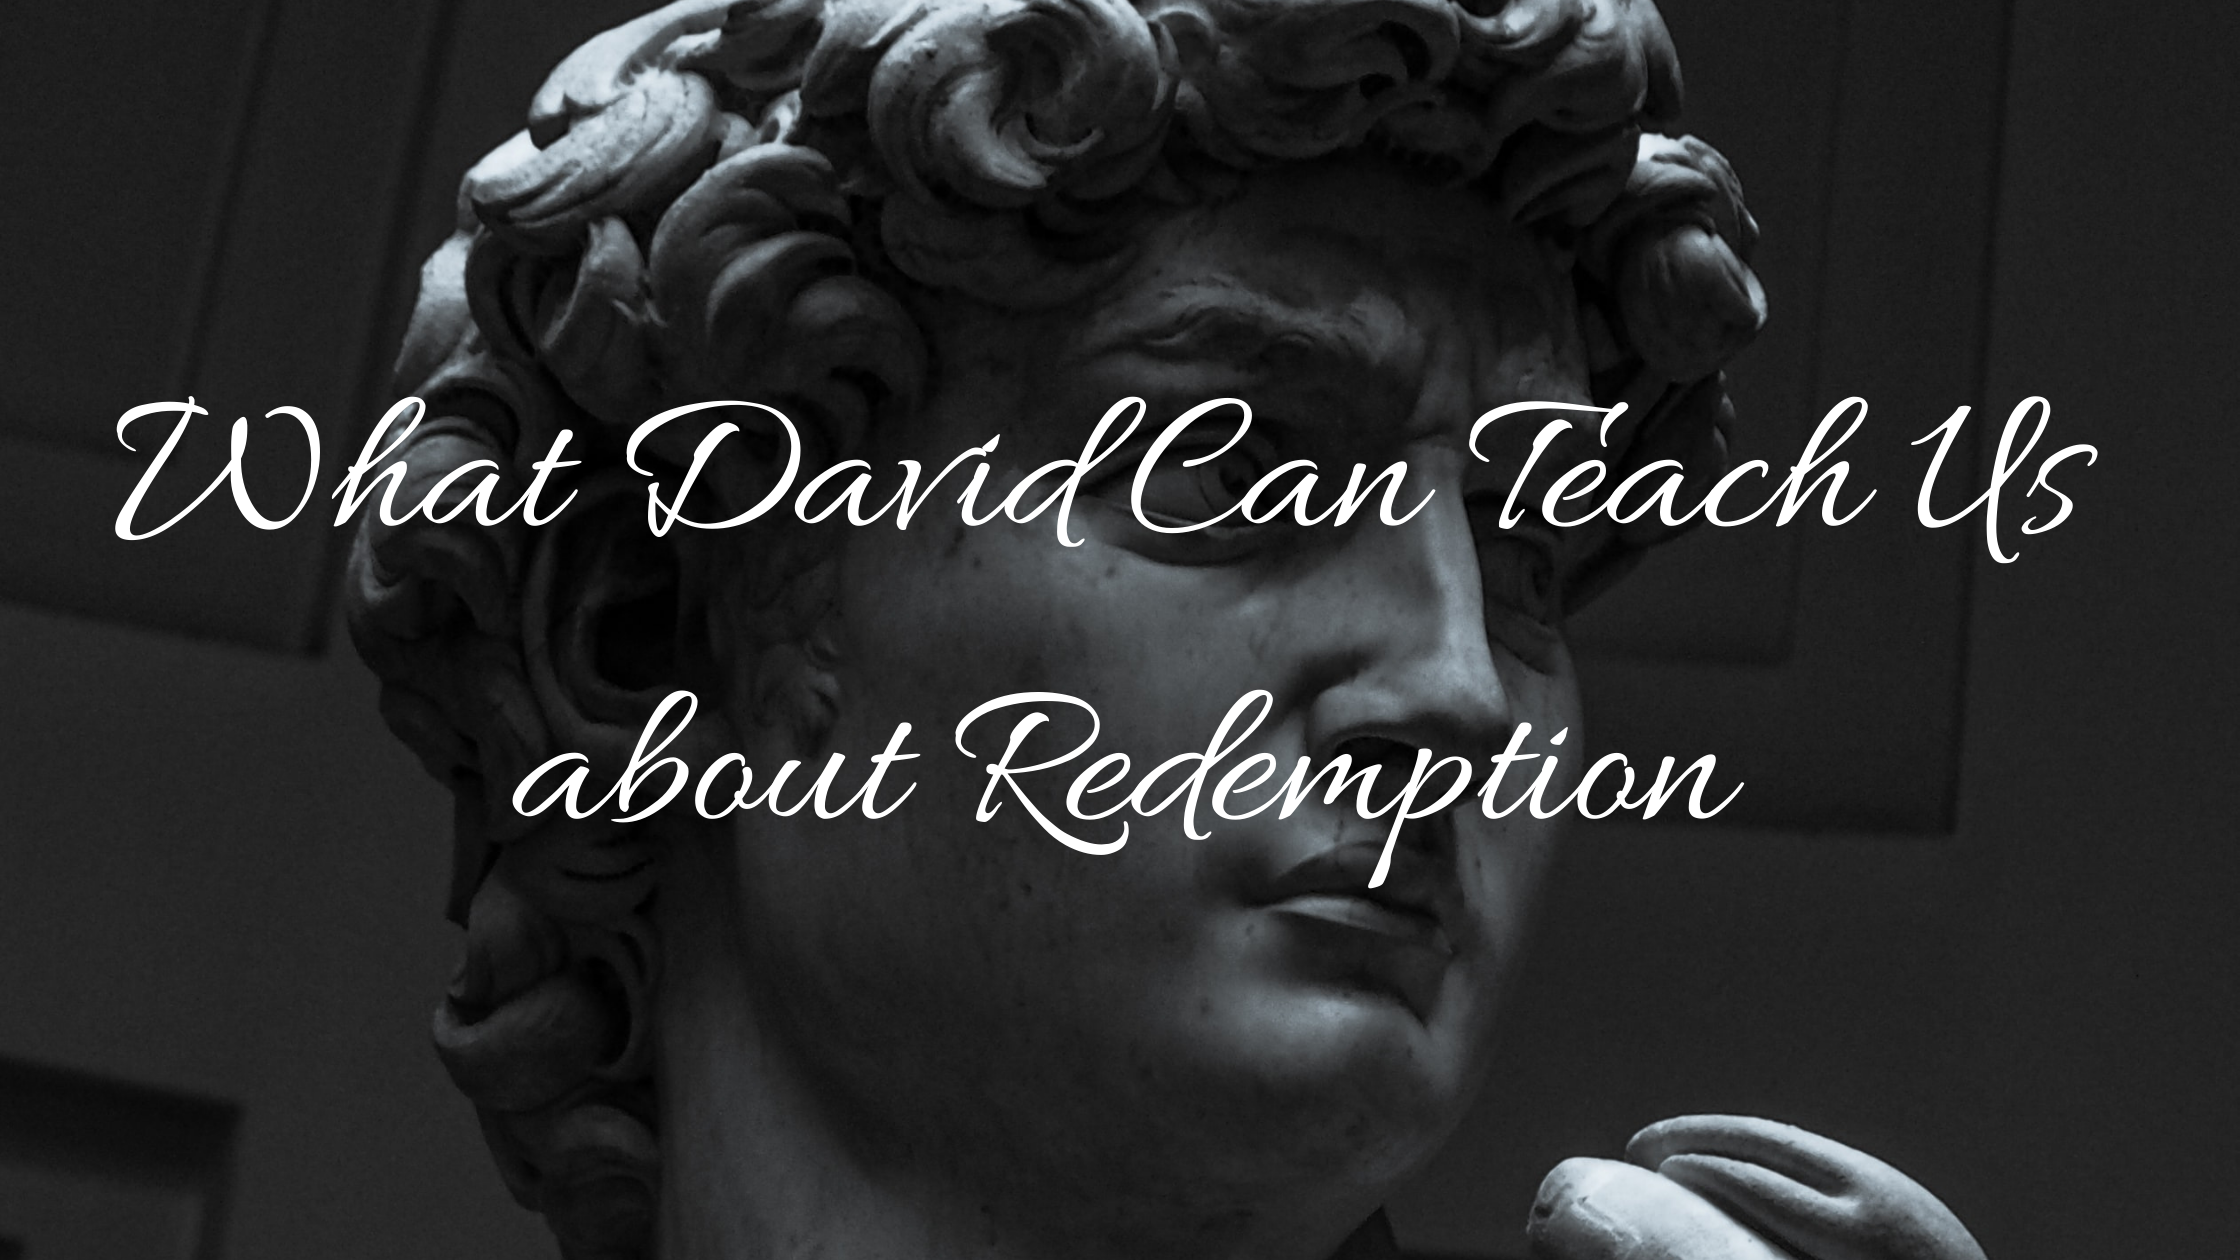 What David Can Teach Us about Redemption blog title with David statue in background